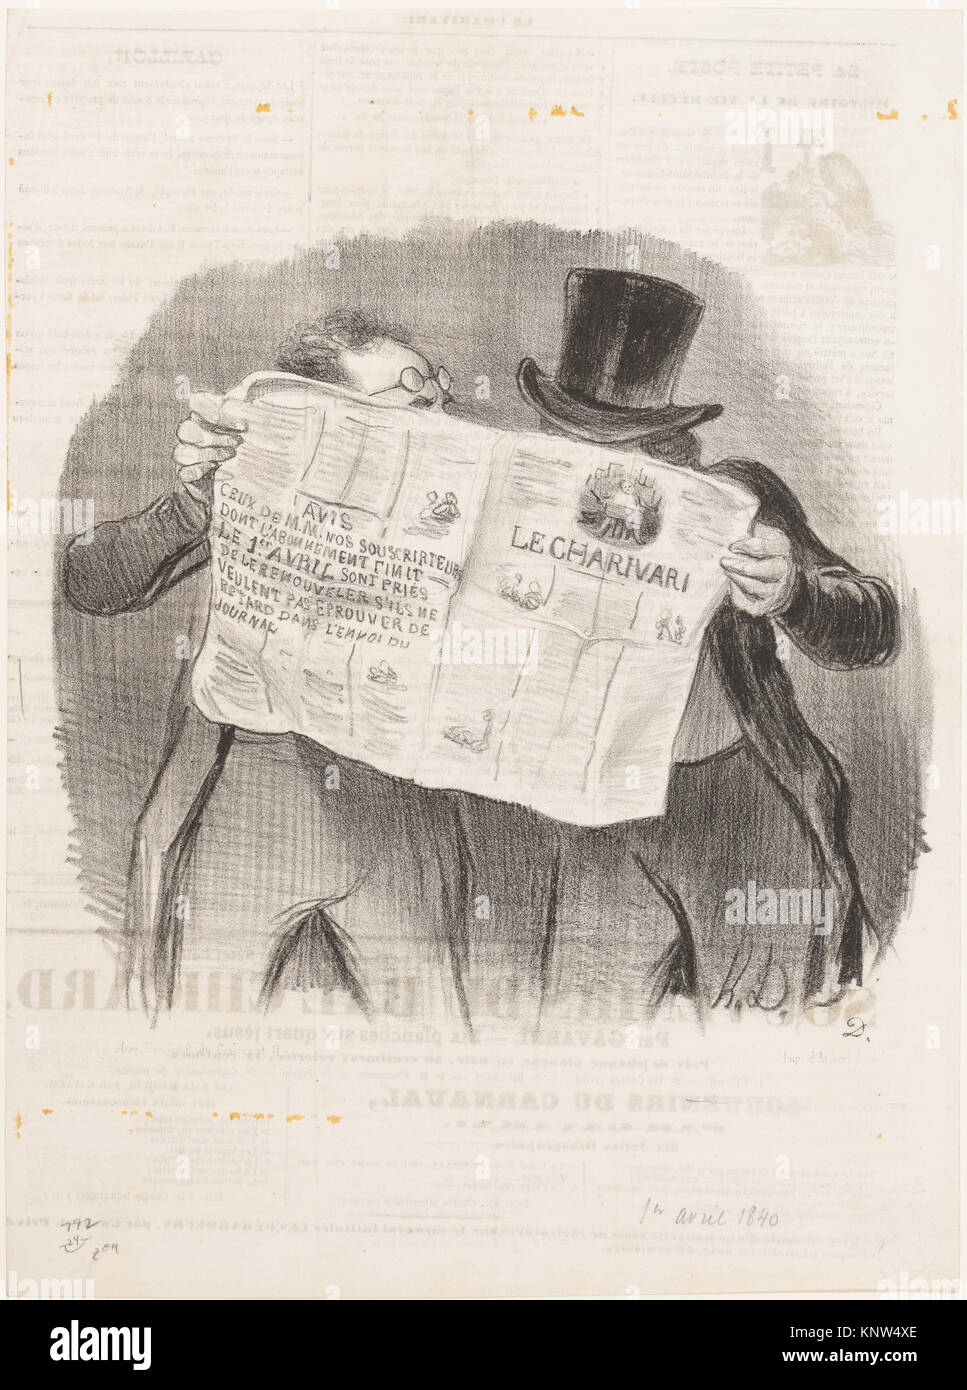 Advice to Subscribers, published in Le Charivari, April 1, 1840 MET DP156689 380673 Artist: Honor? Daumier, French, Marseilles 1808?1879 Valmondois, Advice to Subscribers, published in Le Charivari, April 1, 1840, April 1, 1840, Lithograph; first state of two (Delteil), Sheet: 13 1/8 ? 9 11/16 in. (33.3 ? 24.6 cm). The Metropolitan Museum of Art, New York. Bequest of Grace M. Pugh, 1985 (1986.1180.966) Stock Photo